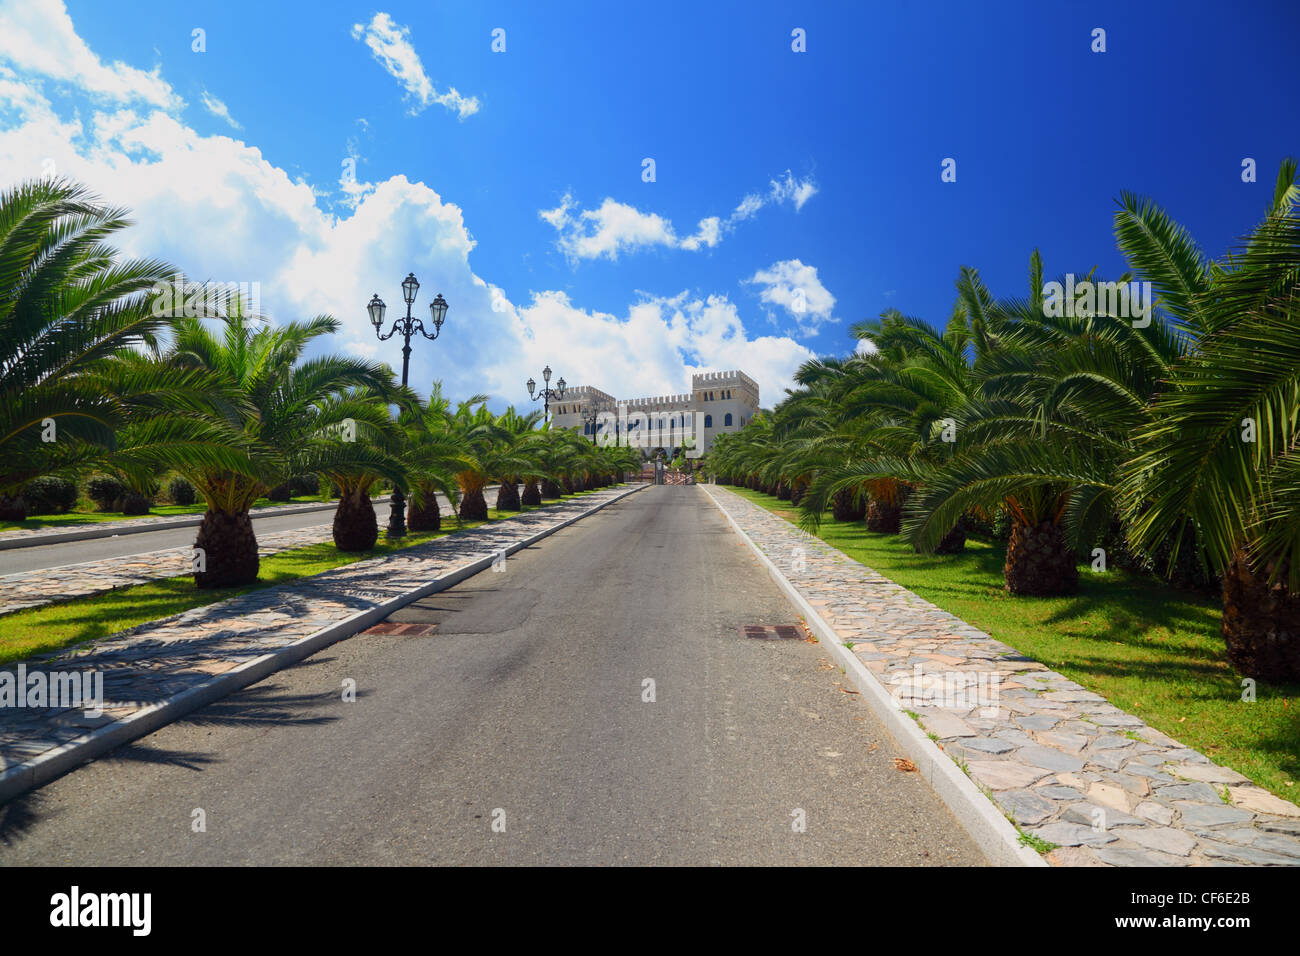 Palm trees planted in row along mall leading to ancient white castle on sunny day Stock Photo